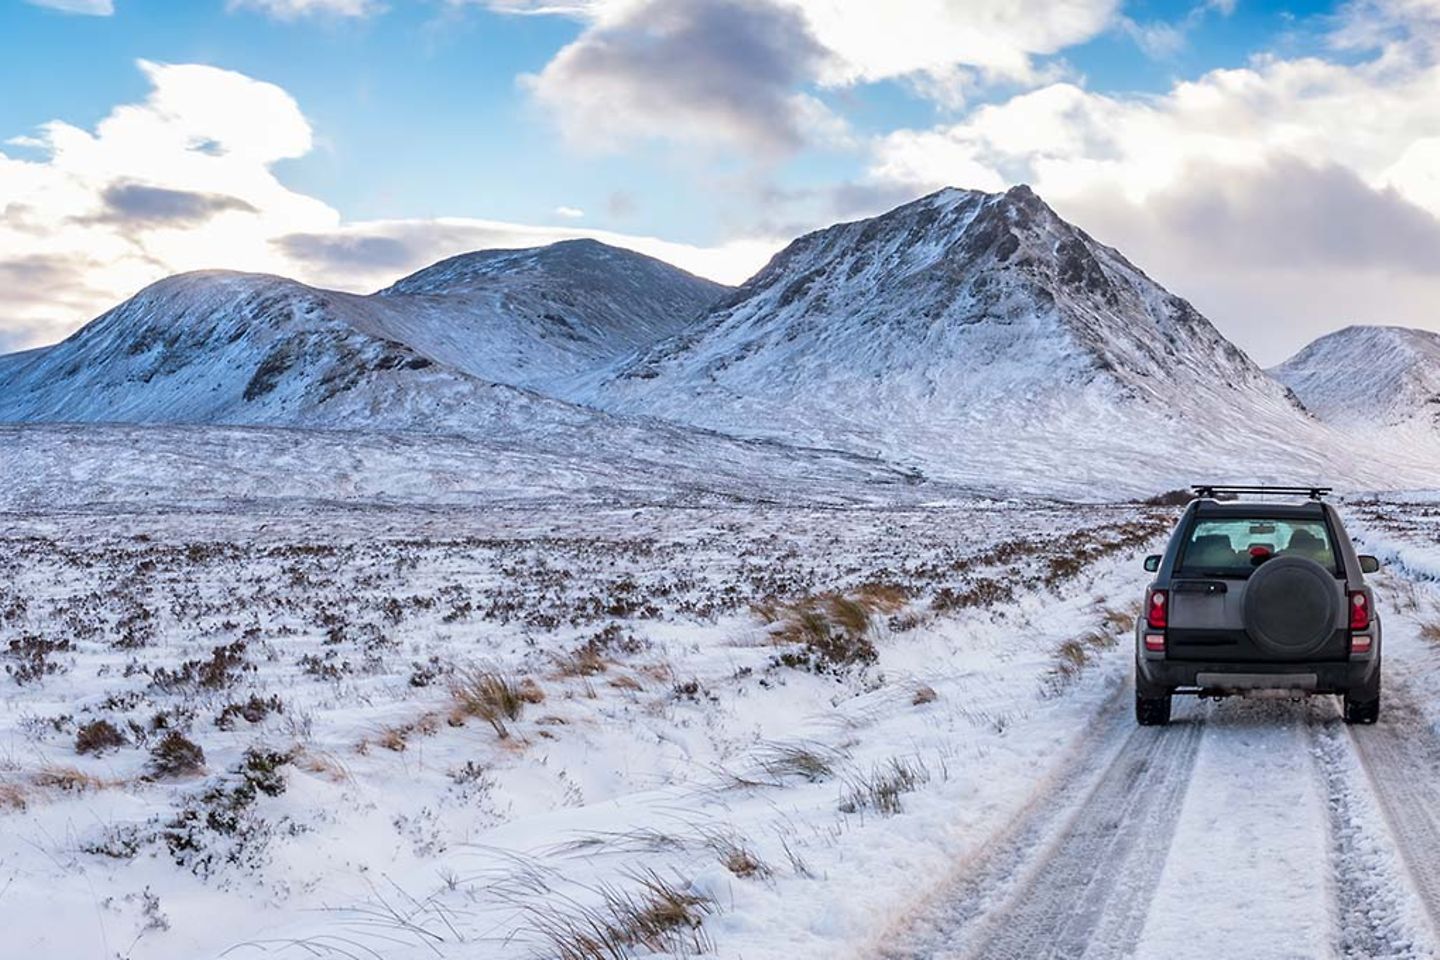 An off road vehicle in a snowy landscape with mountains